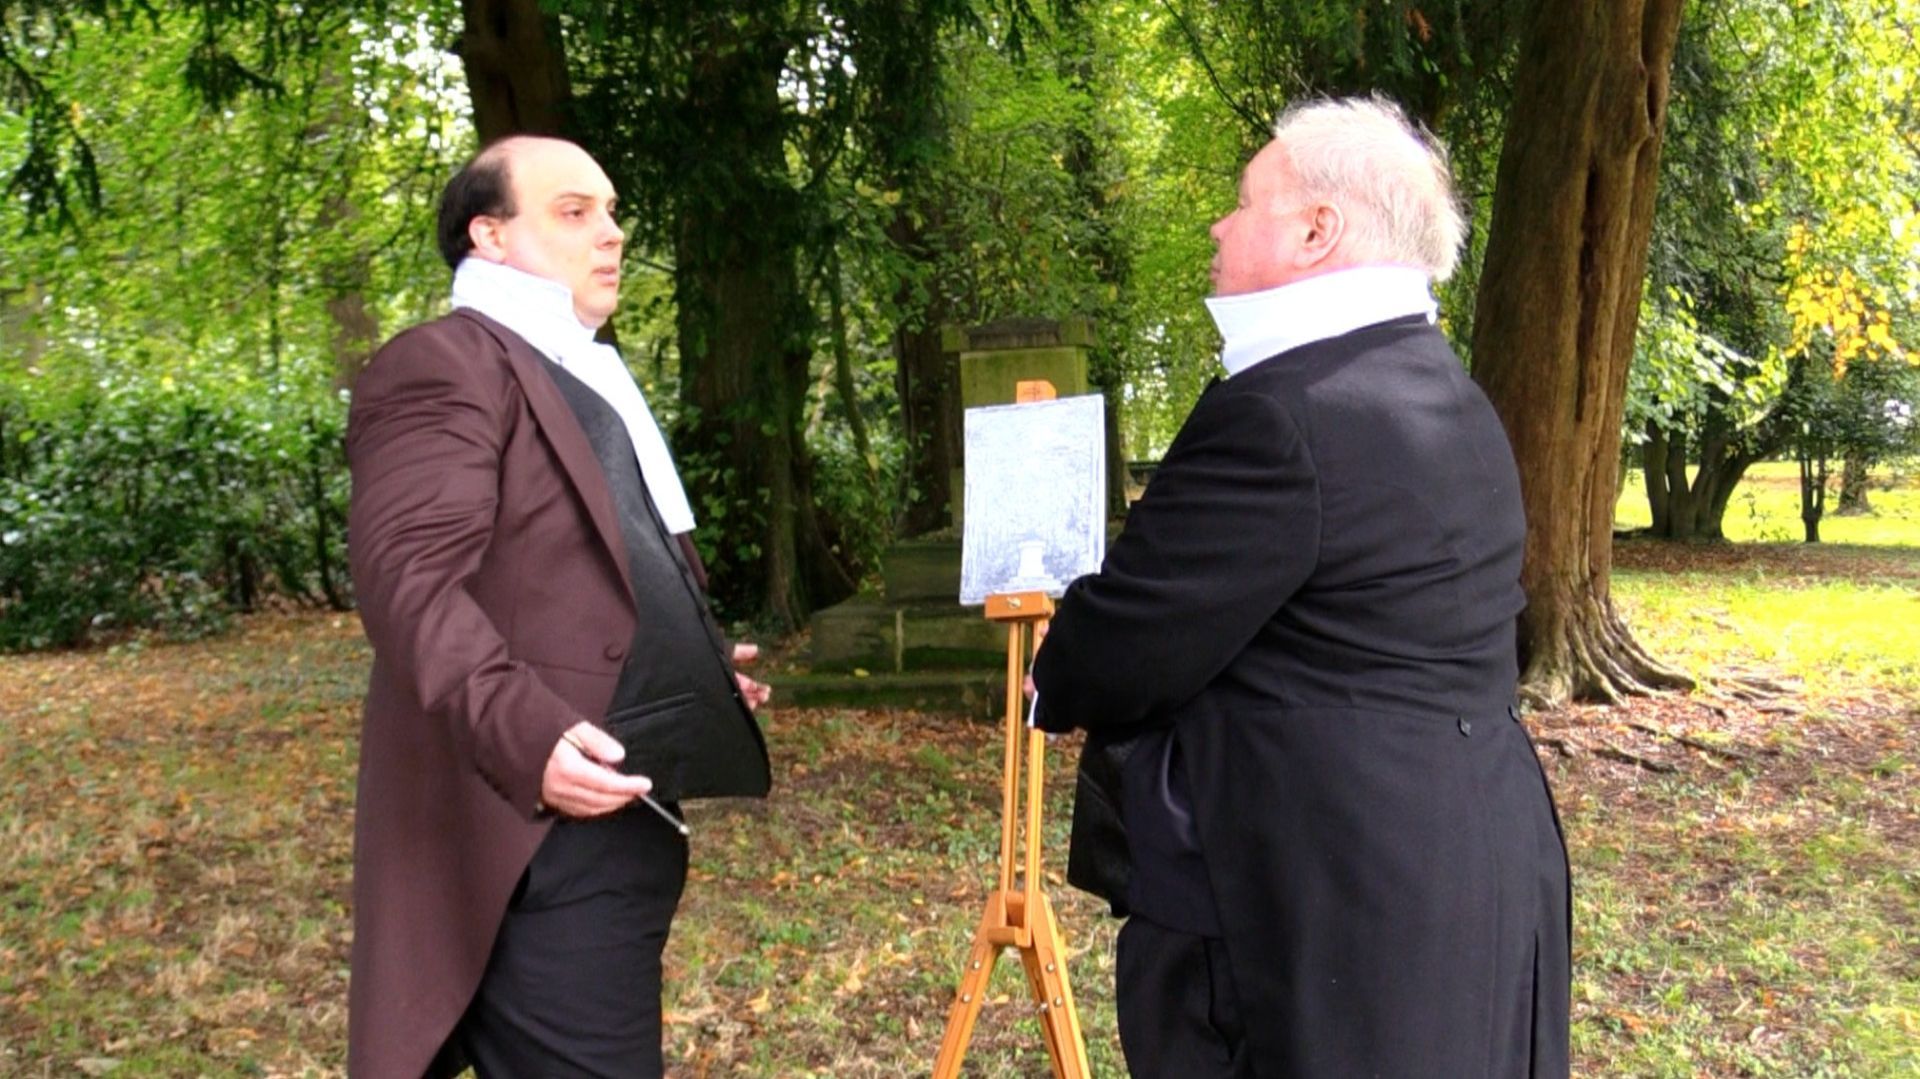 two men in suits are standing next to each other in a park .